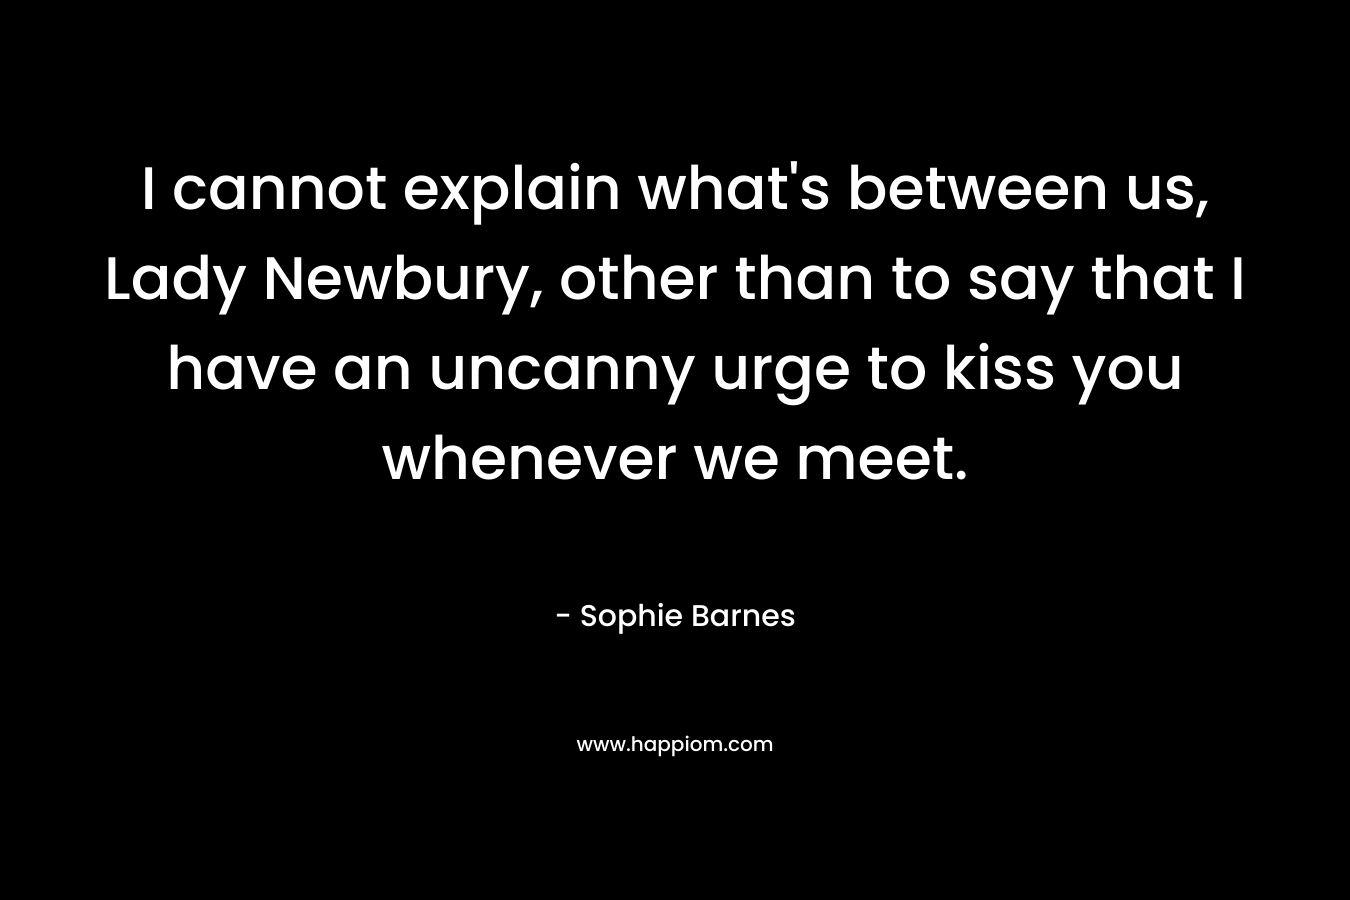 I cannot explain what's between us, Lady Newbury, other than to say that I have an uncanny urge to kiss you whenever we meet.